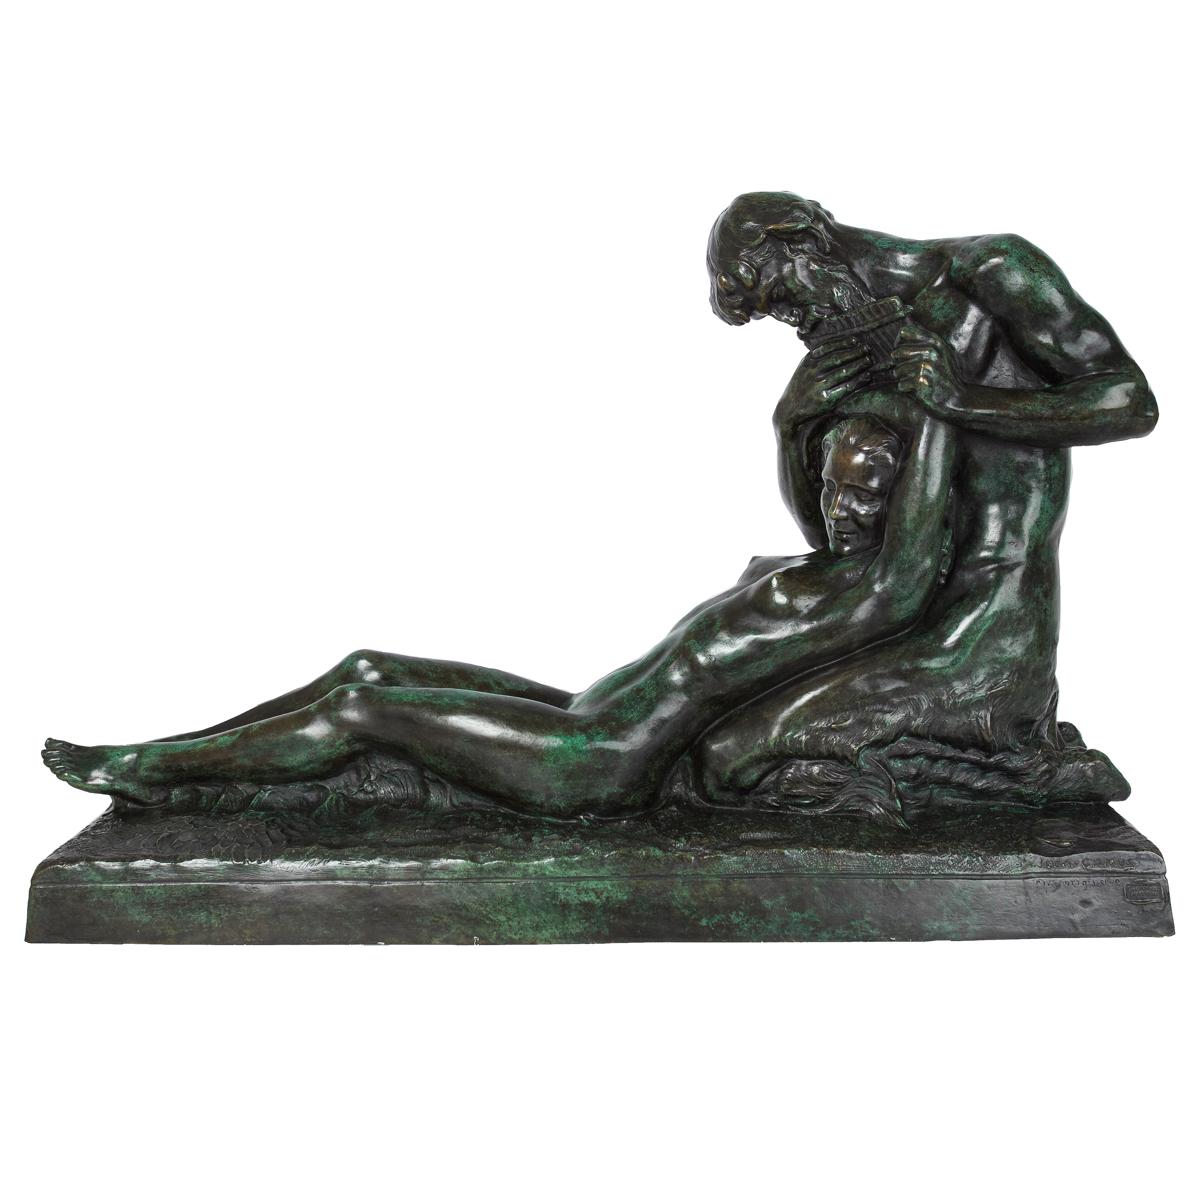 A rich Art Nouveau model of kneeling Pan playing his siku for the young nymphe deep in sleep upon his lap, her legs and body comfortably resting on a bed of soft grass. The model is finished in an exquisite verde and black surface patina with a